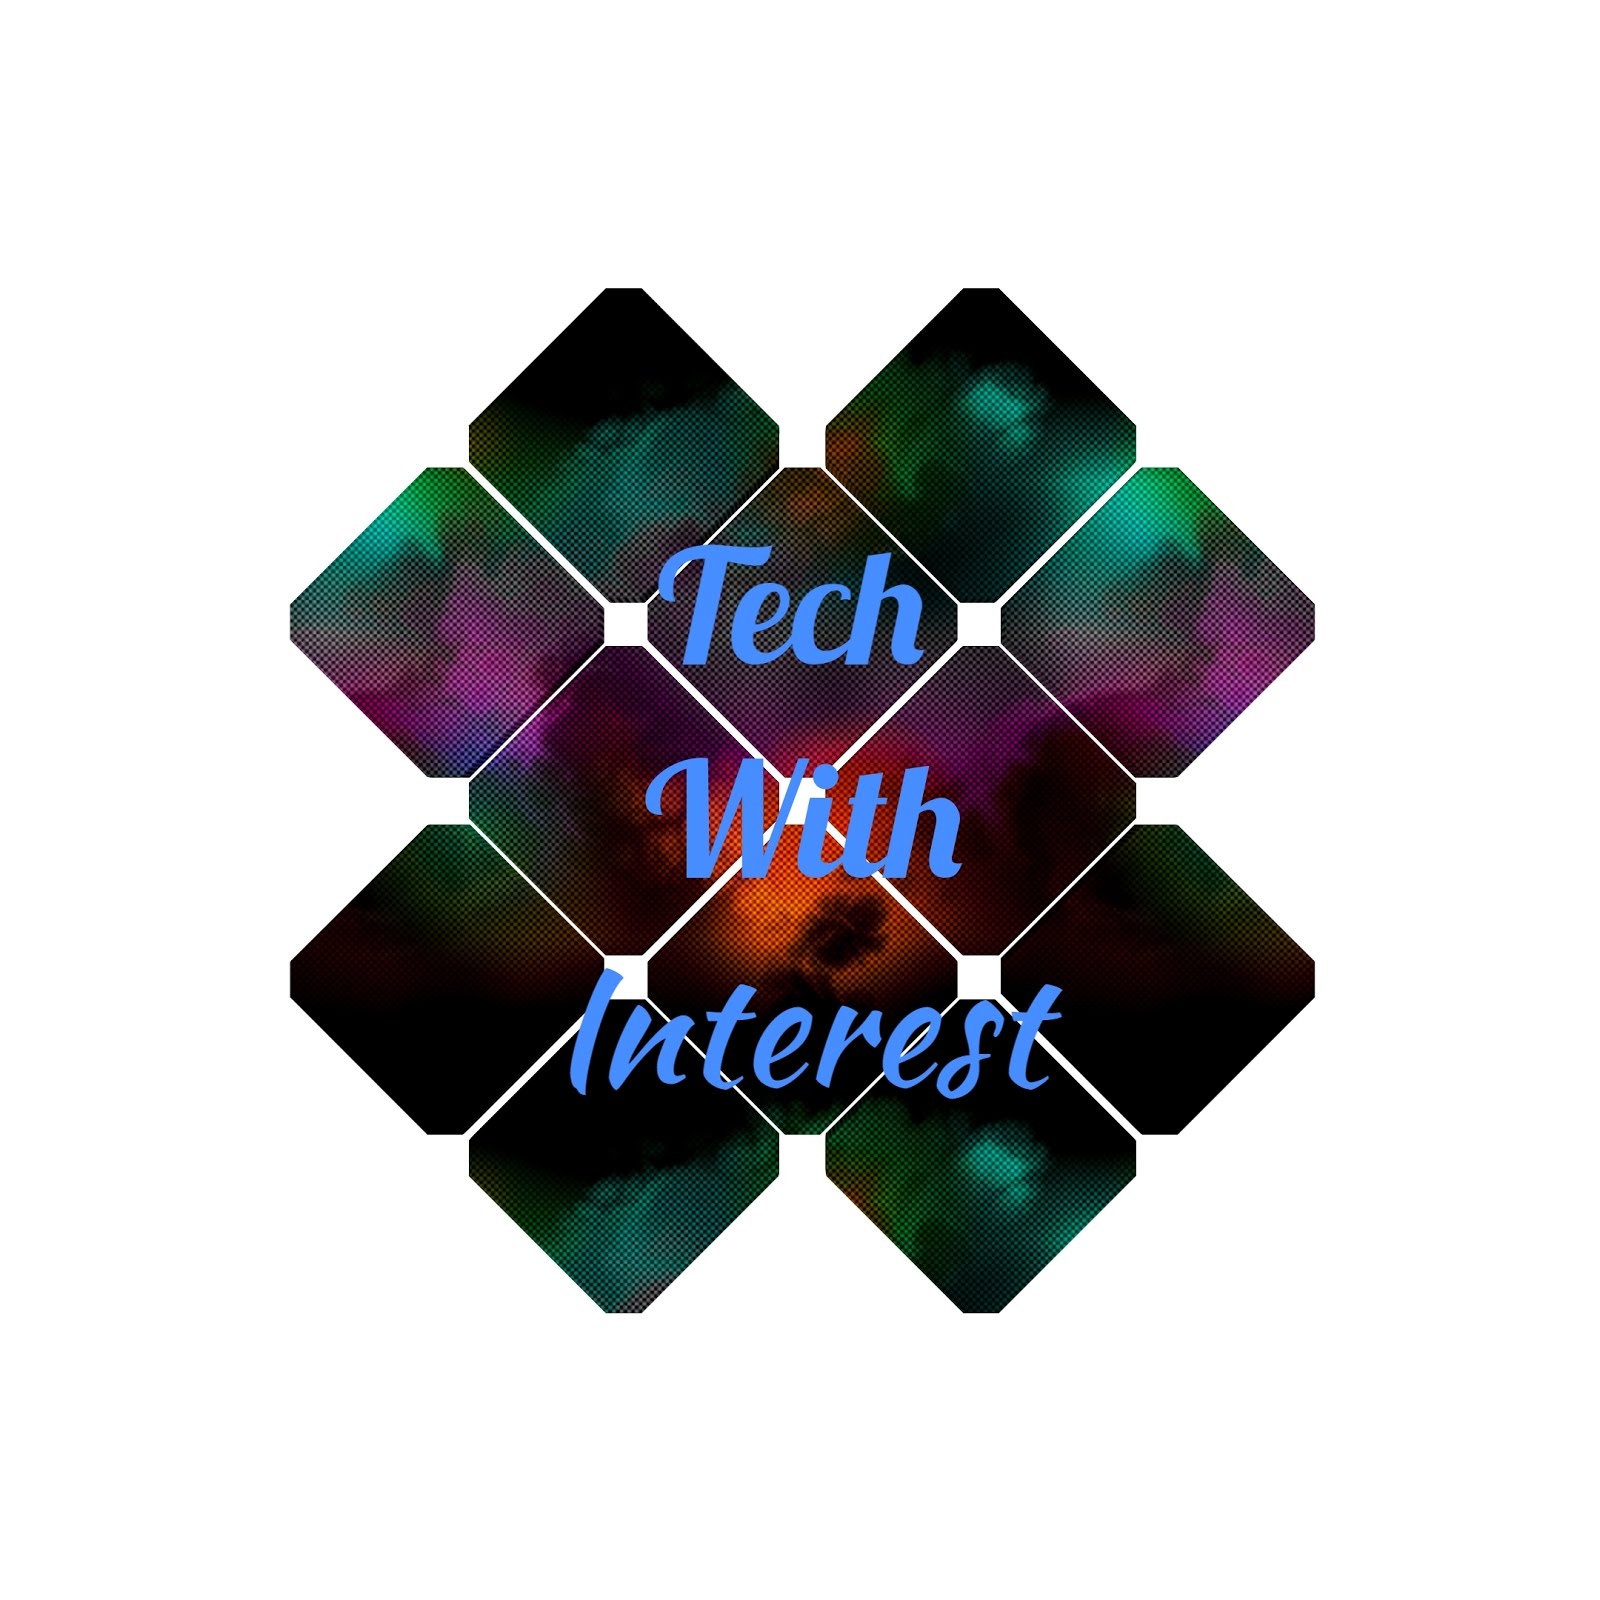 Tech with interest